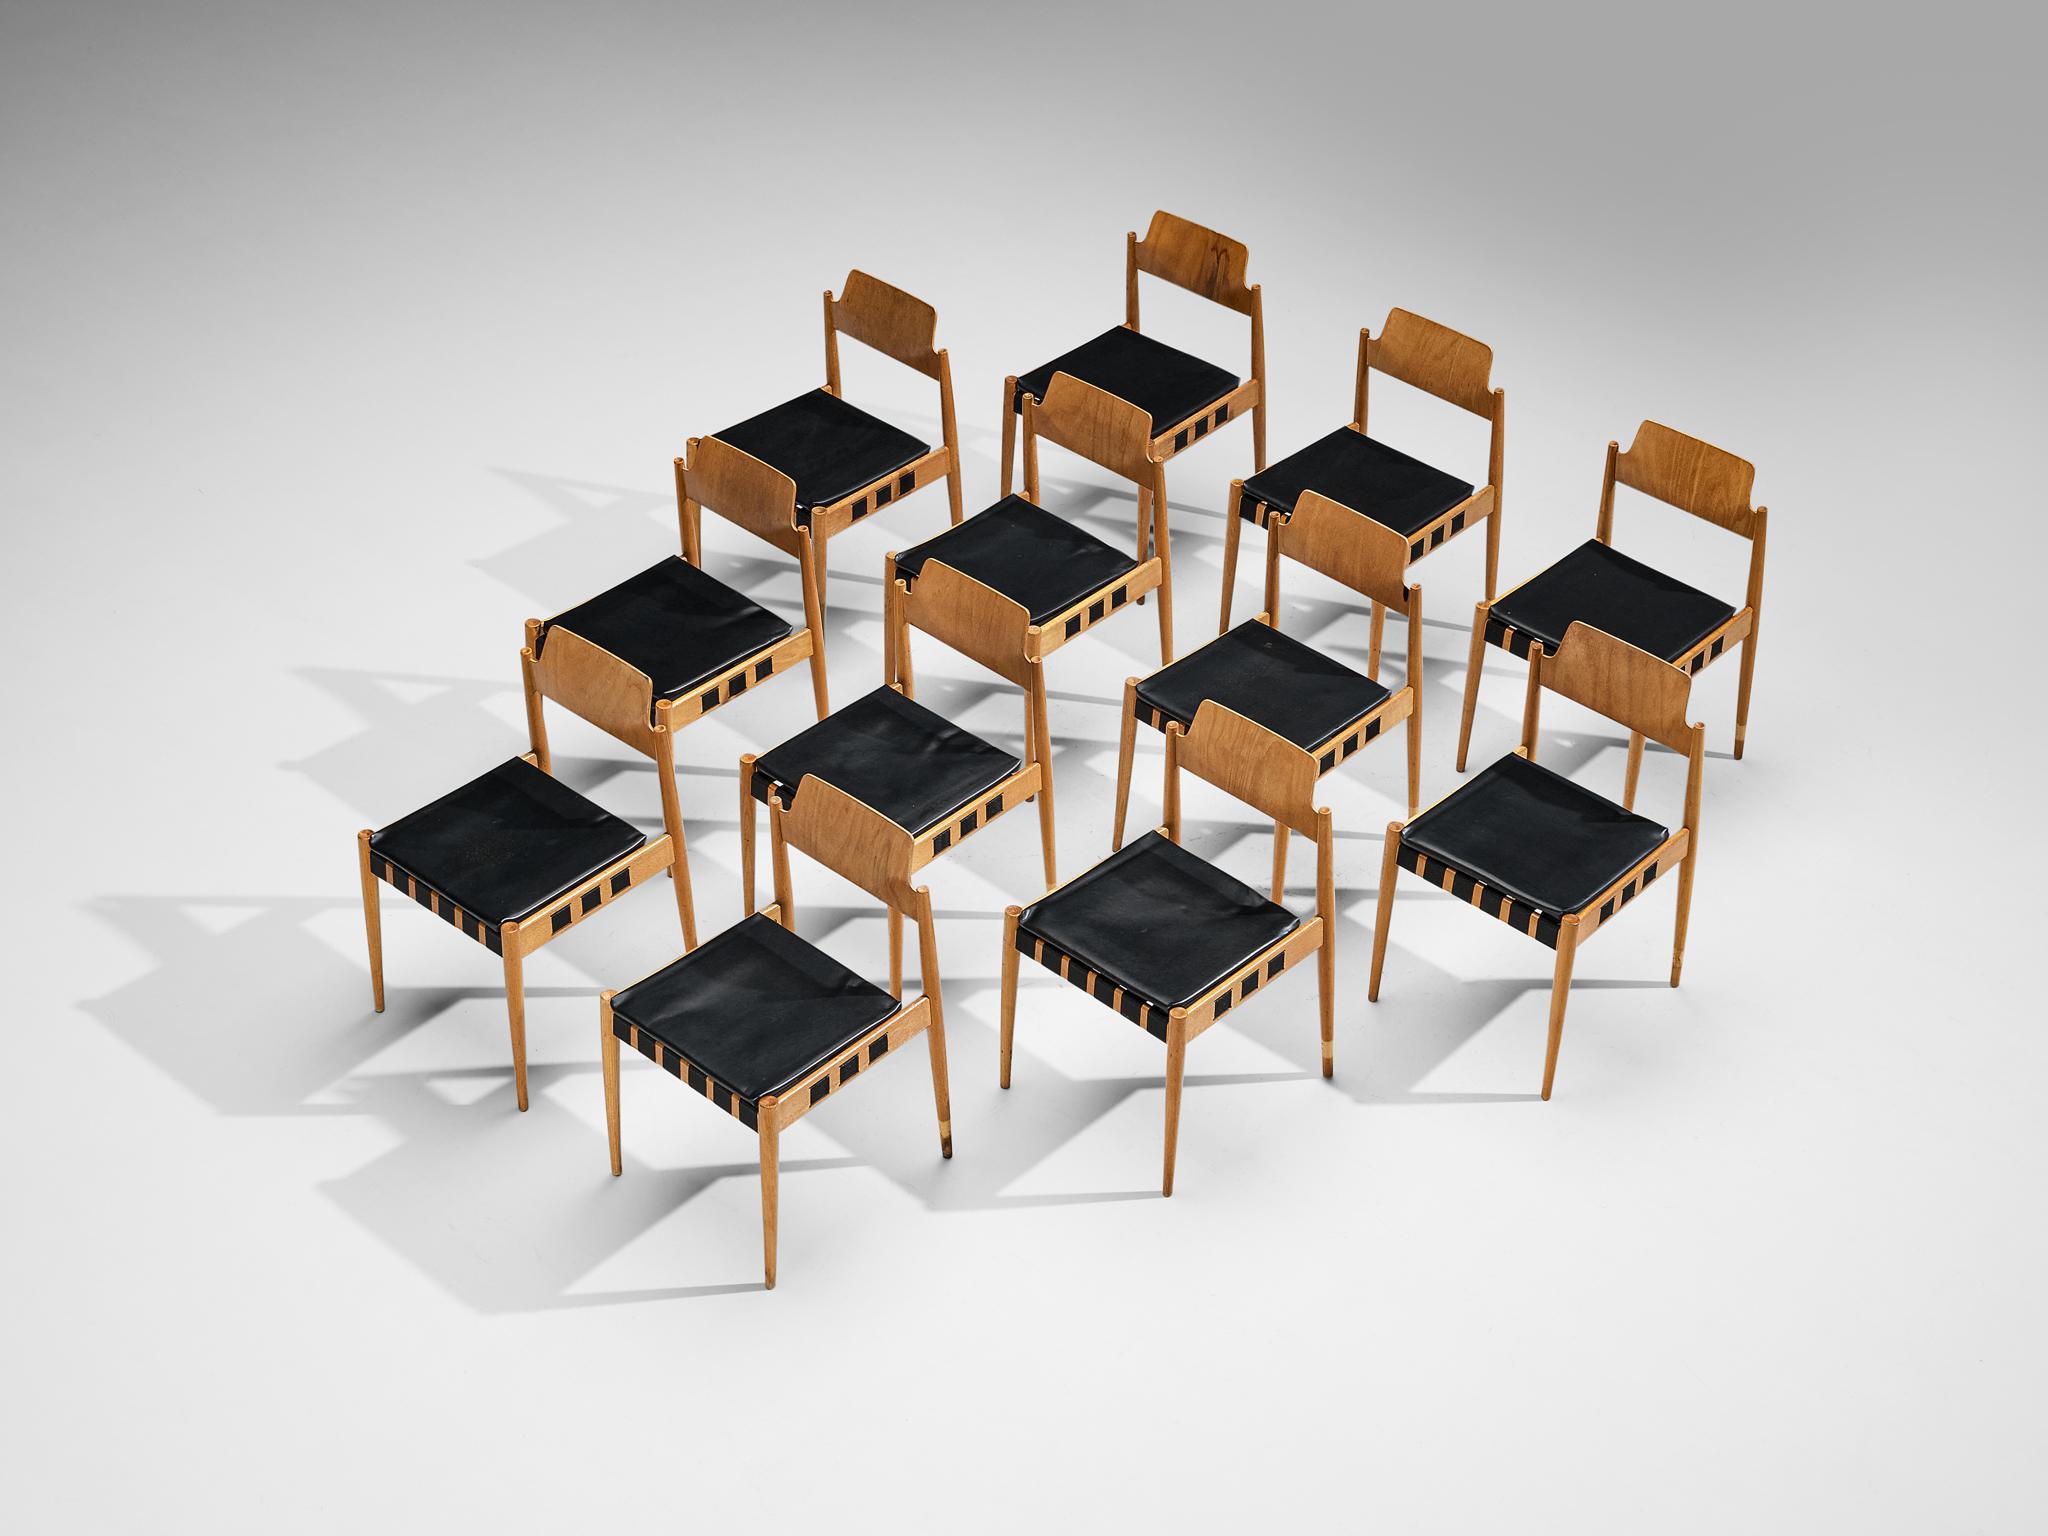 Egon Eiermann for Wilde and Spieth, set of twelve dining chairs, beech, leather, leatherette, Germany, 1960s

Famous postwar German architect Egon Eiermann designed these chairs for German manufacturer Wilde + Spieth in the early 1960s. These chairs